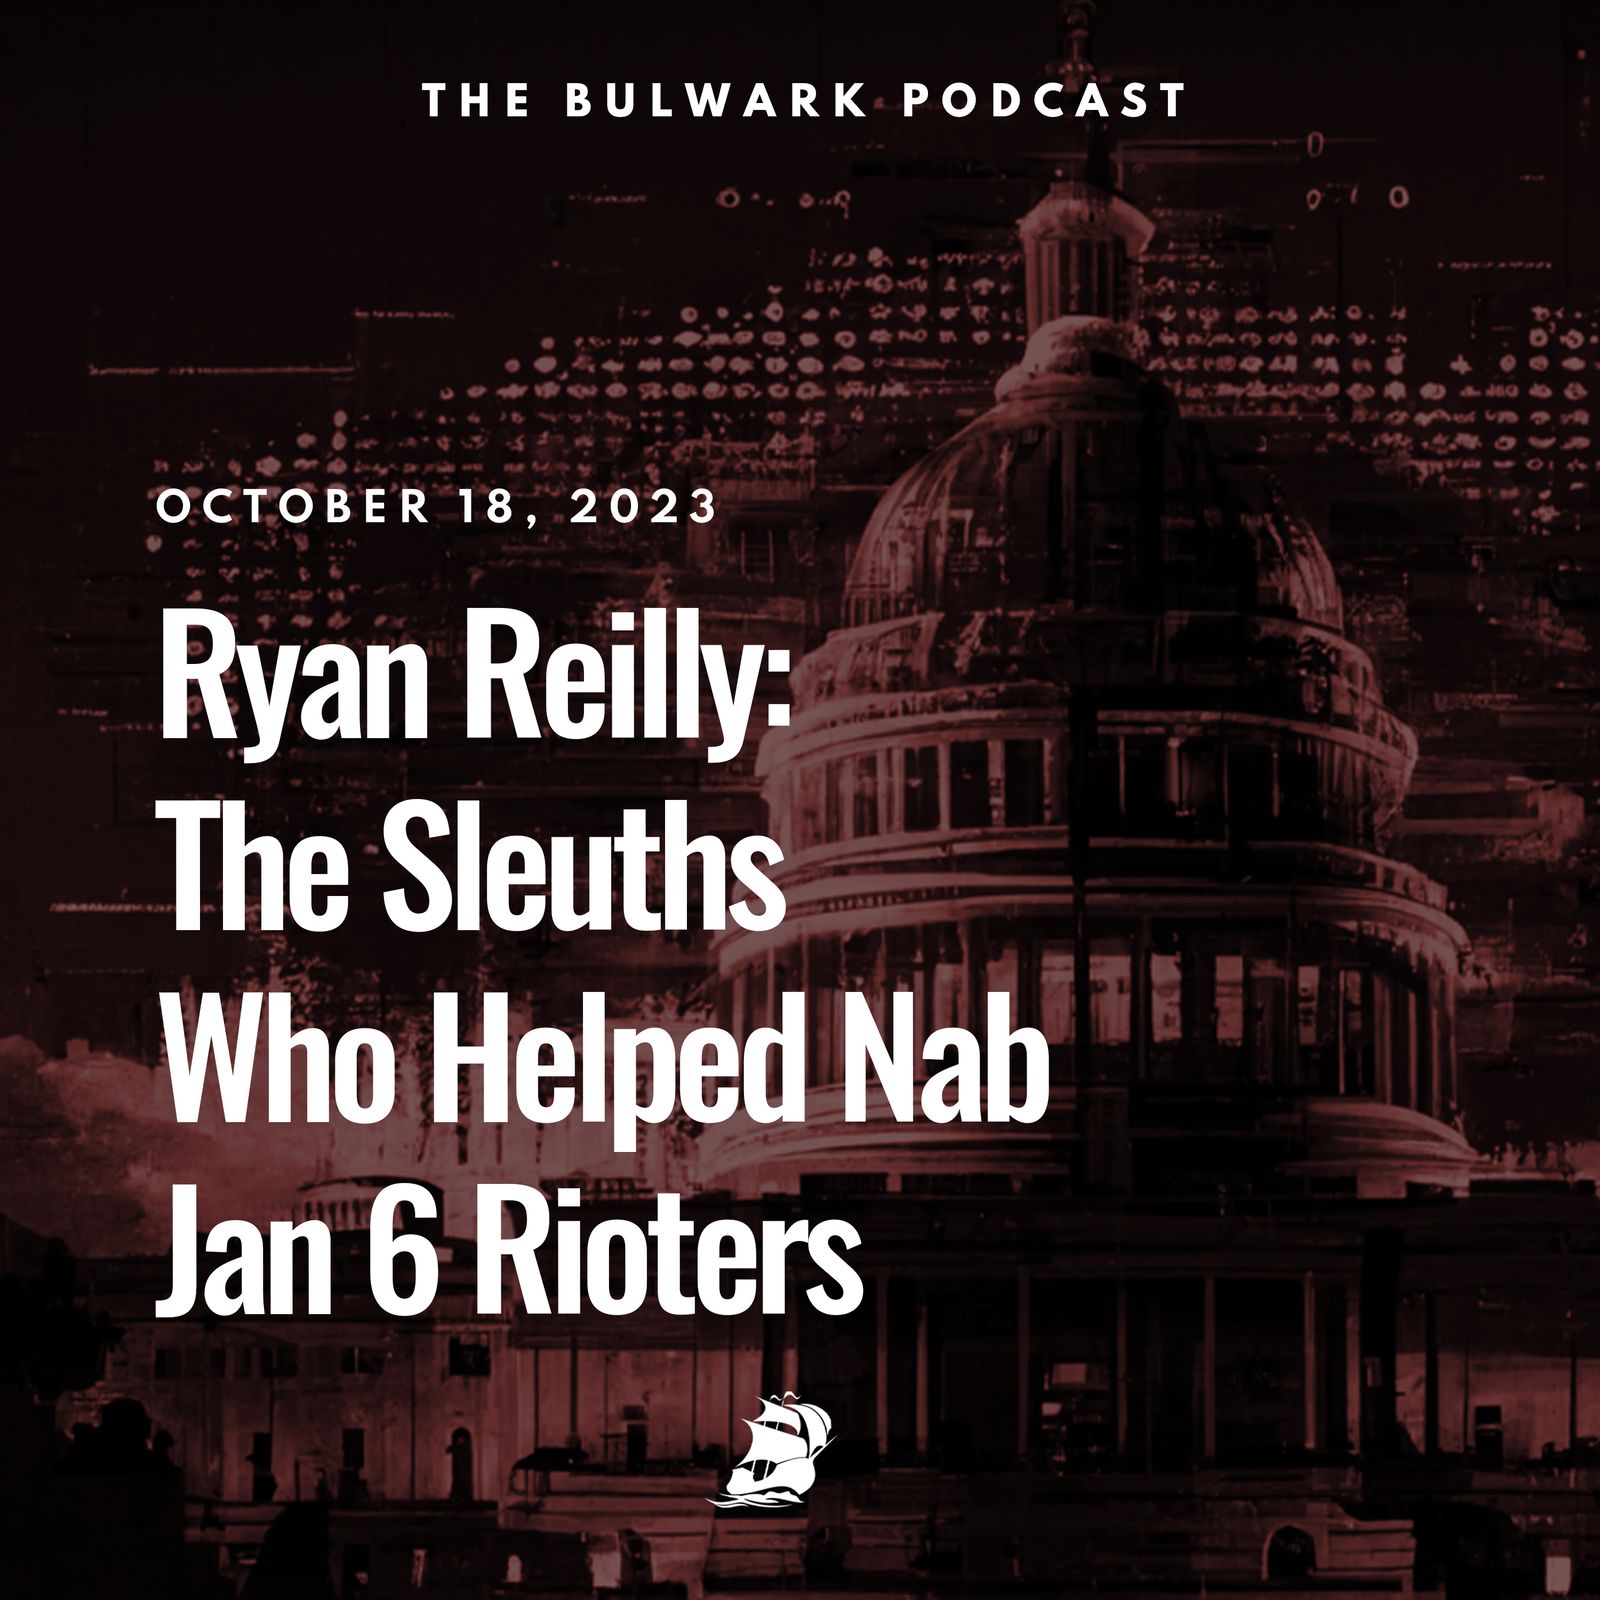 Ryan Reilly: The Sleuths Who Helped Nab Jan 6 Rioters